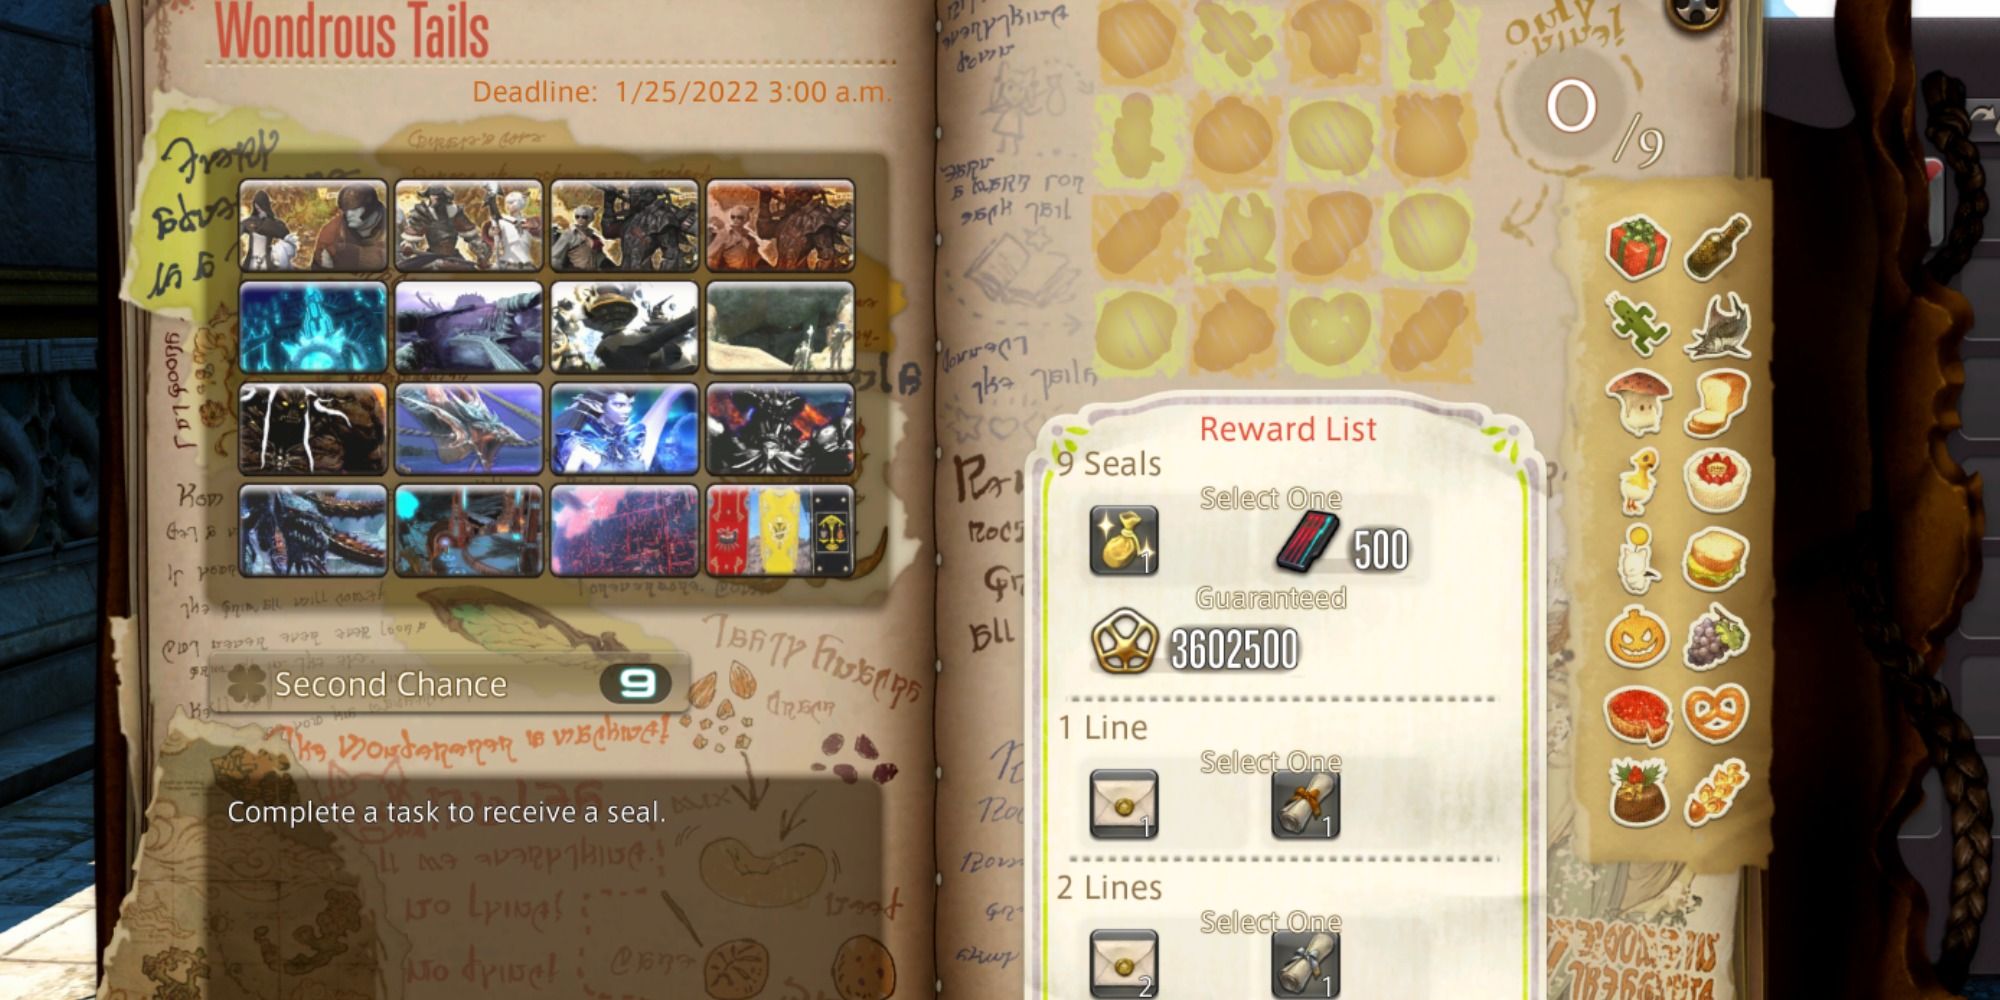 The Wondrous Tails Journal in Final Fantasy 14